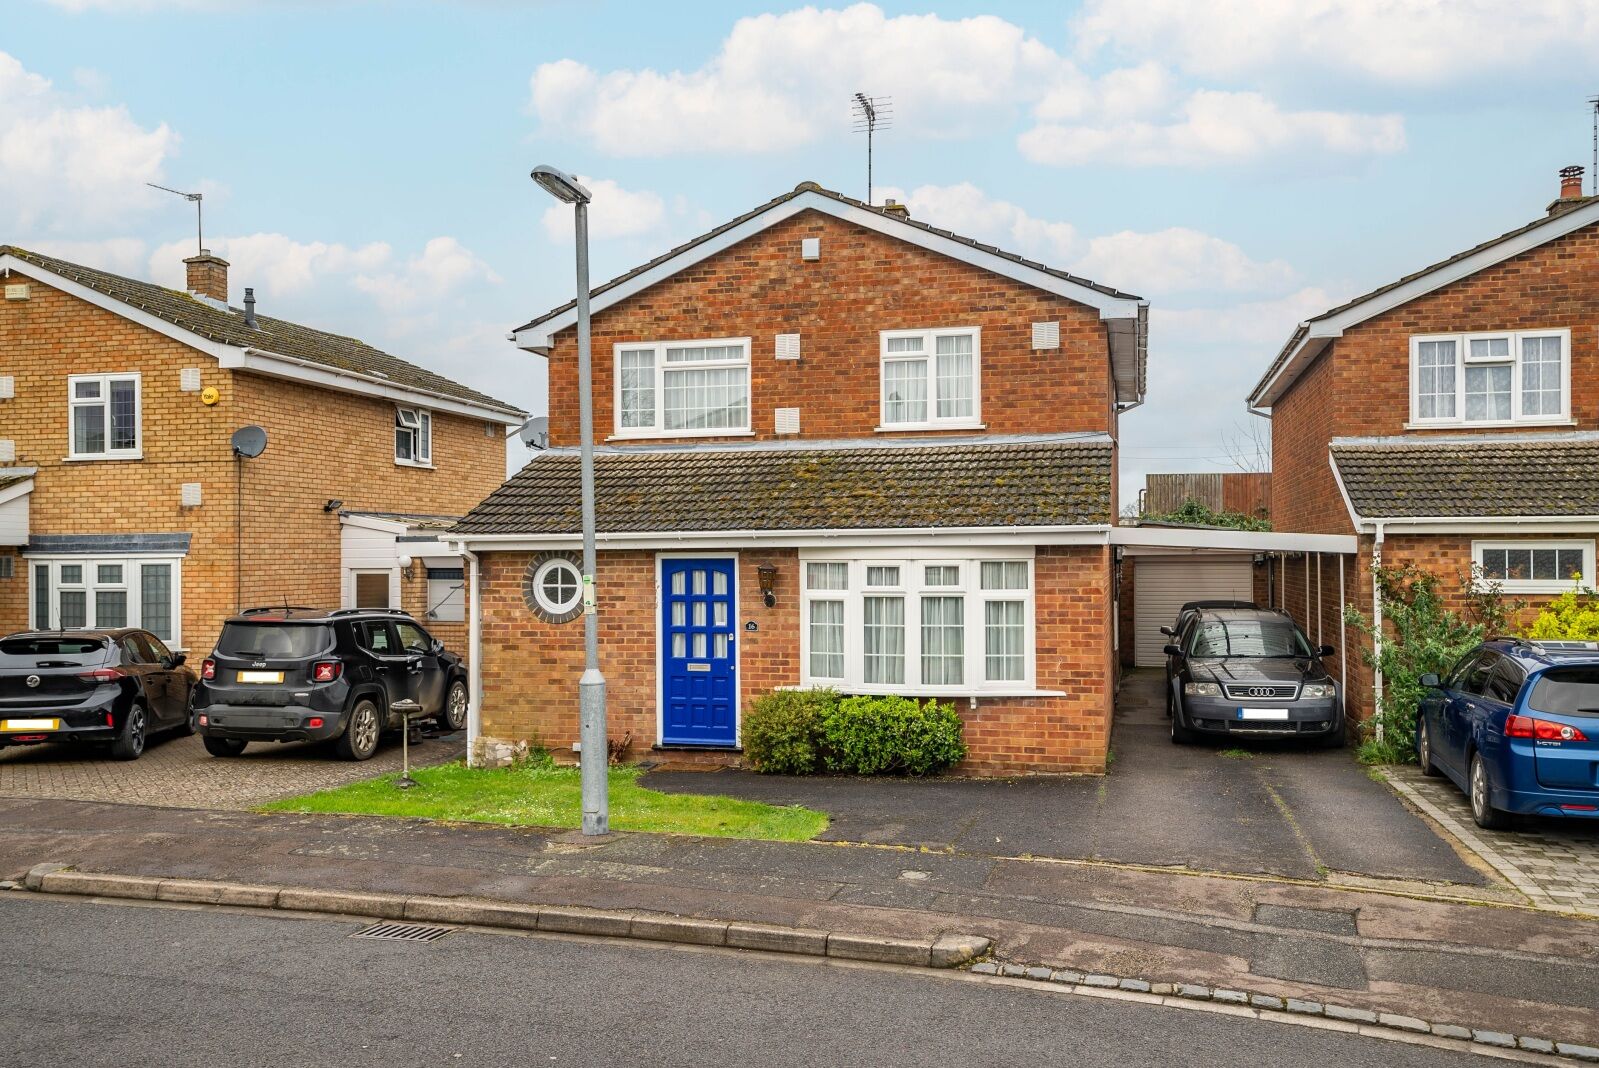 4 bedroom detached house for sale Claydown Way, Slip End, LU1, main image